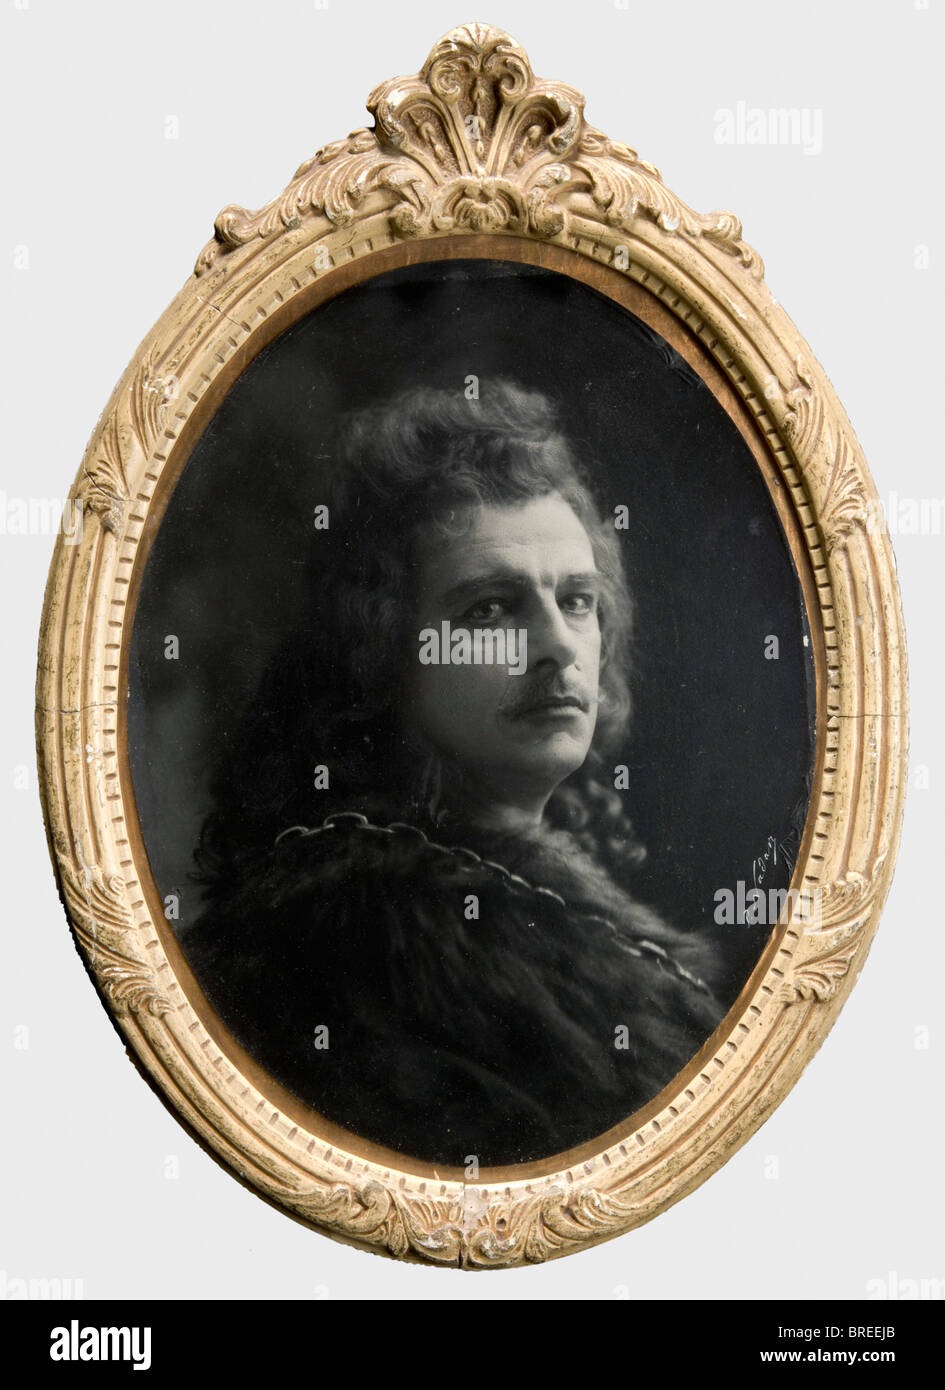 Paul Nadar (1856 - 1939), a portrait of the tenor Jean de Reszke (1850 - 1925) Photograph, handwritten signature on the right edge 'P. Nadar'. Oval shape, size ca. 36.5 x 28 cm. Framed and under glass. From the estate of the Russian soprano Félia Litvinne, whose sister was married to Jean's brother, the operatic bass Edouard de Reszke. Also 'Ernest van Dijck 1861 - 1923' by Henri de Curzon, 1933, with pictures of the de Reszkes. Jean de Reszke, born in Warsaw, made his debut as tenor in 1879 and subsequently performed on all important stages of the world. He wa, Stock Photo